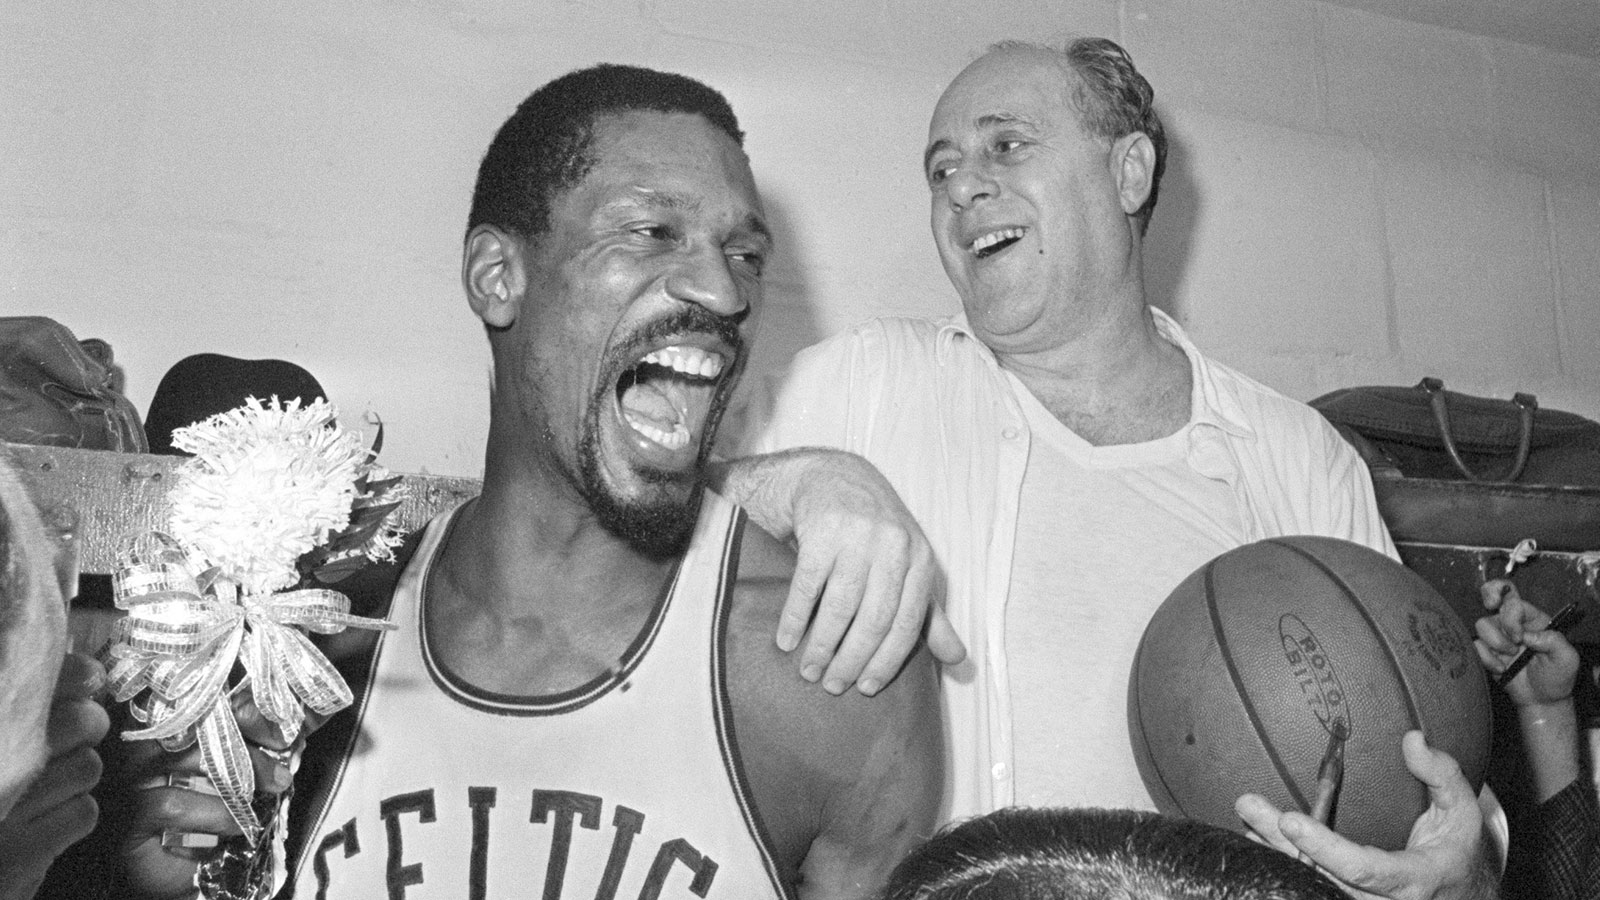 Bill Russell’s legacy of NBA championships and cerebral fight for equal rights